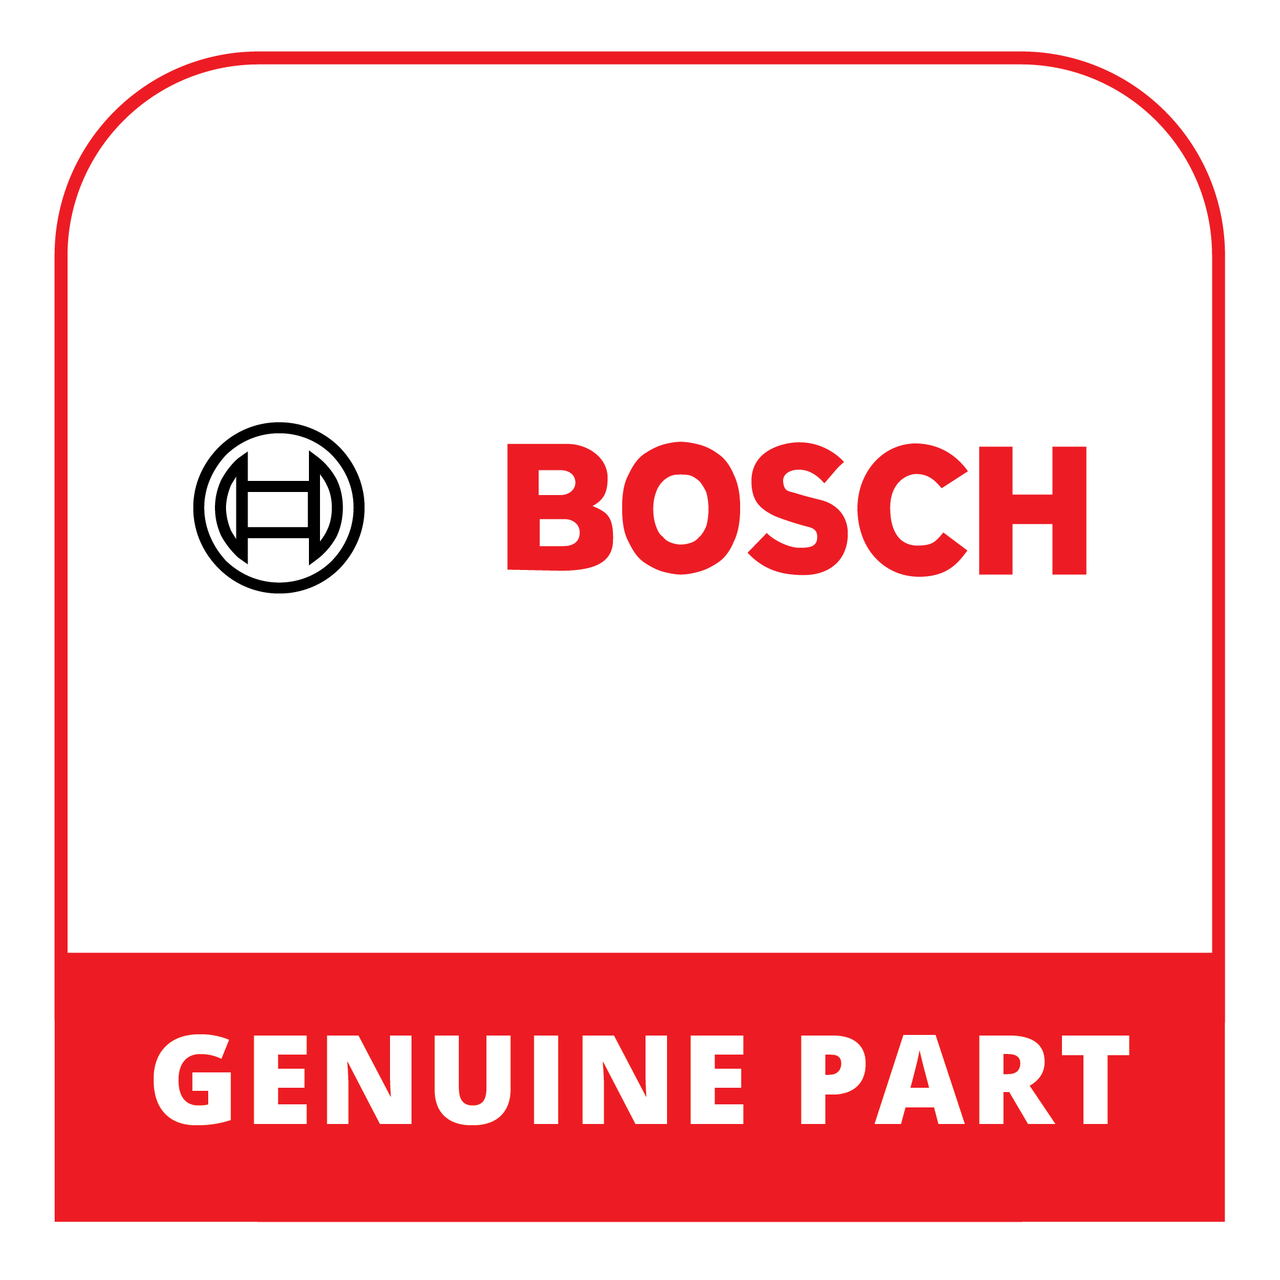 Bosch (Thermador) 20004390 - Cutlery Drawer - Genuine Bosch (Thermador) Part